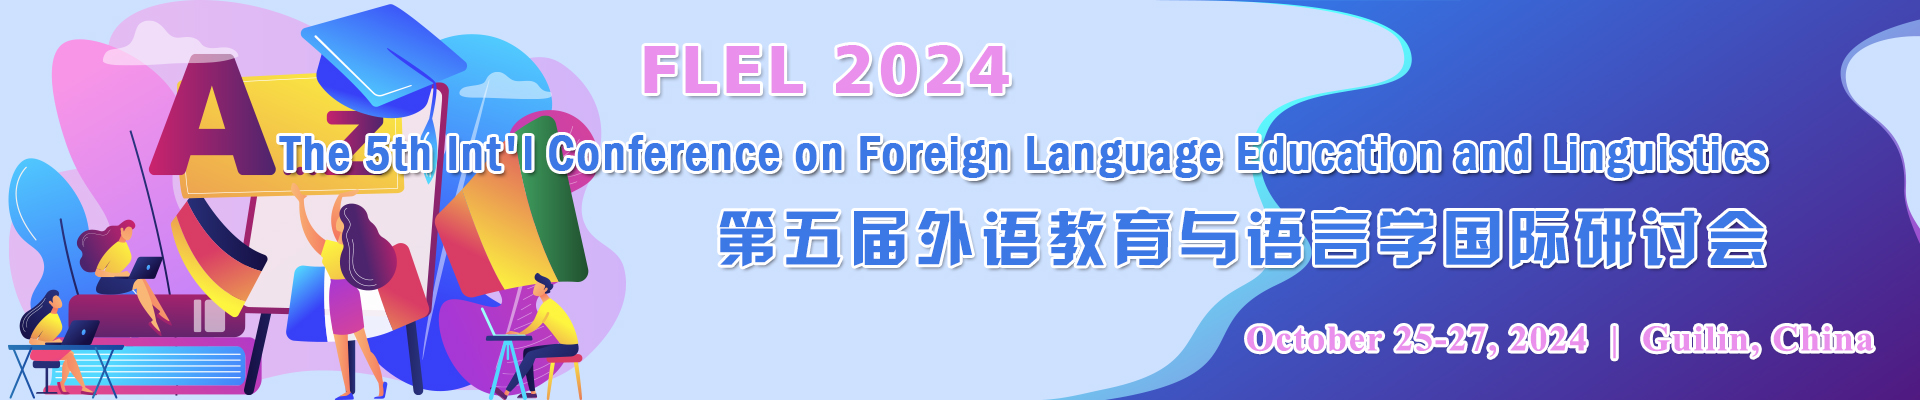 The 5th Int'l Conference on Foreign Language Education and Linguistics (FLEL 2024), Guilin, Guangxi, China